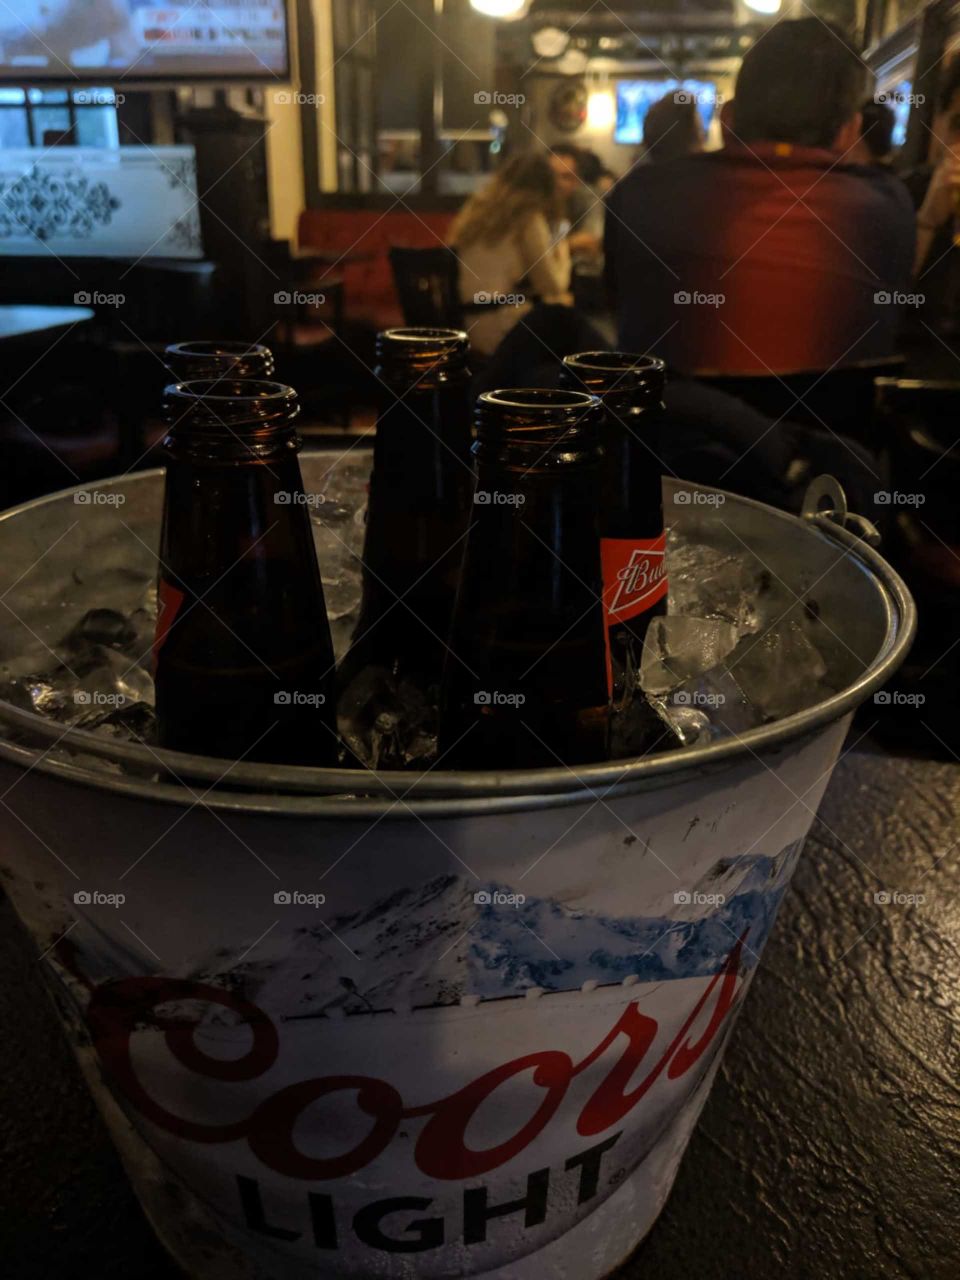 Spring is here! Having some Coors light at a bar!